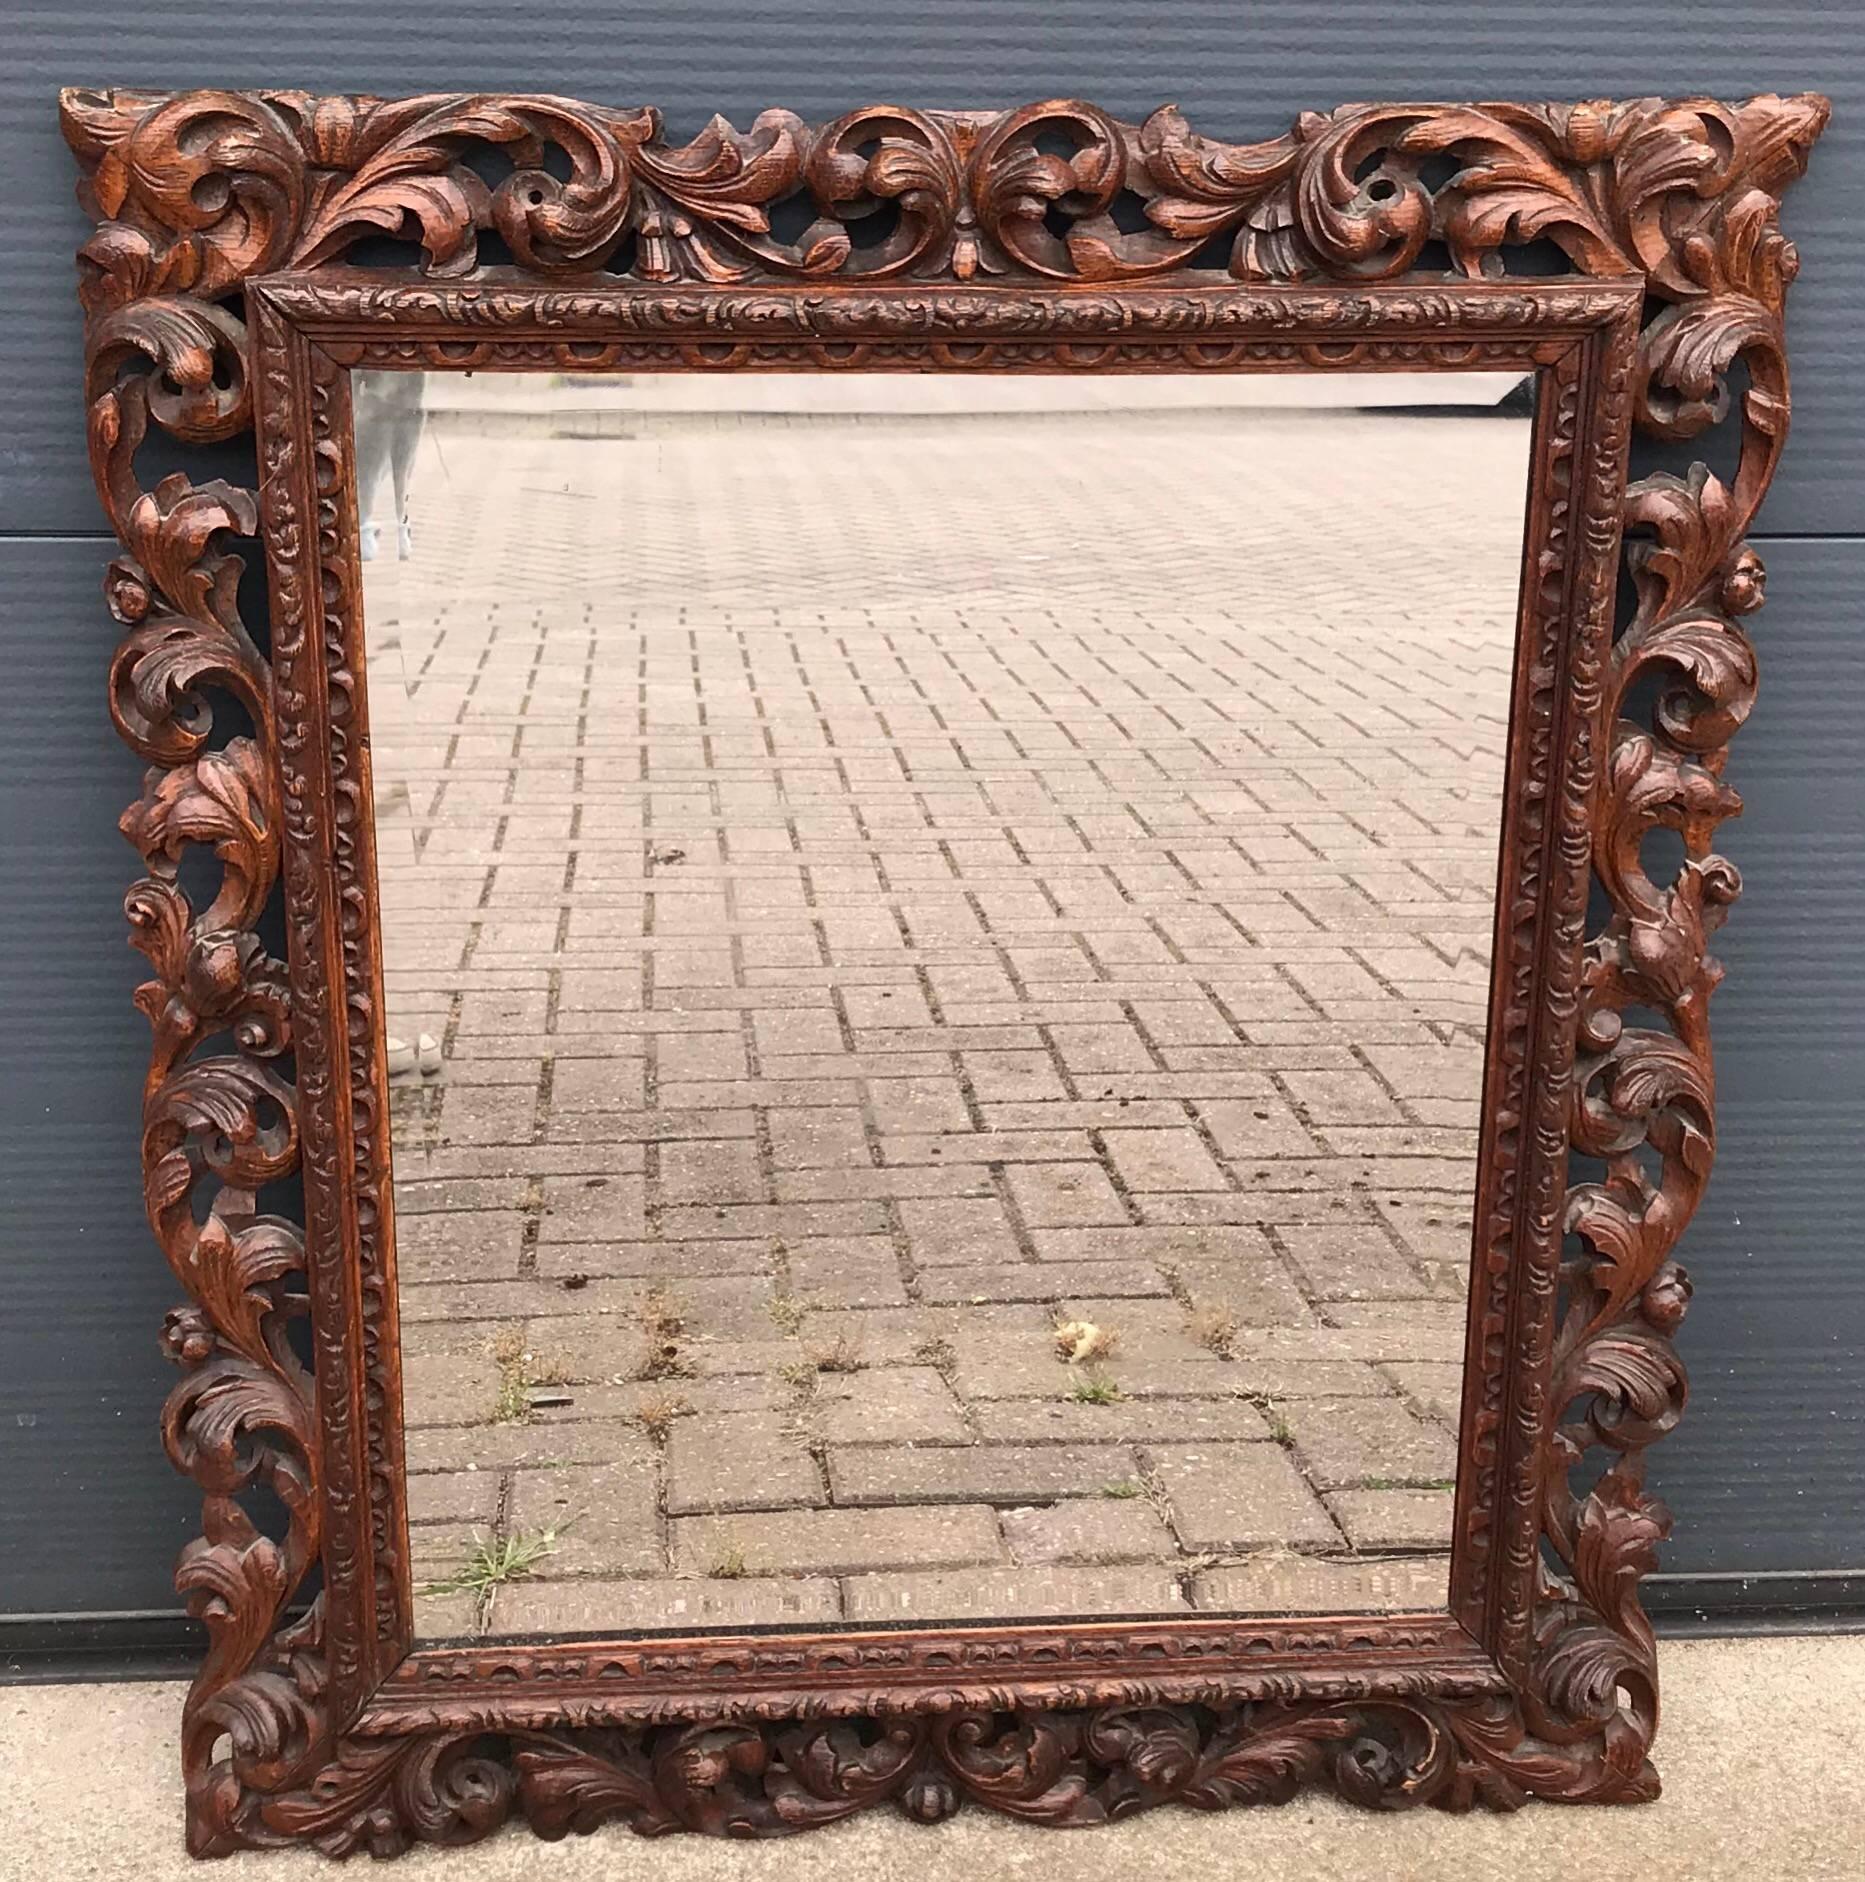 Highly decorative, quality carved antique mirror. 

This beautiful, late 19th century, hand-carved antique mirror frame is in great condition. It is perfectly carved with scrolling acanthus leafs and wild flowers and it has the most beautiful